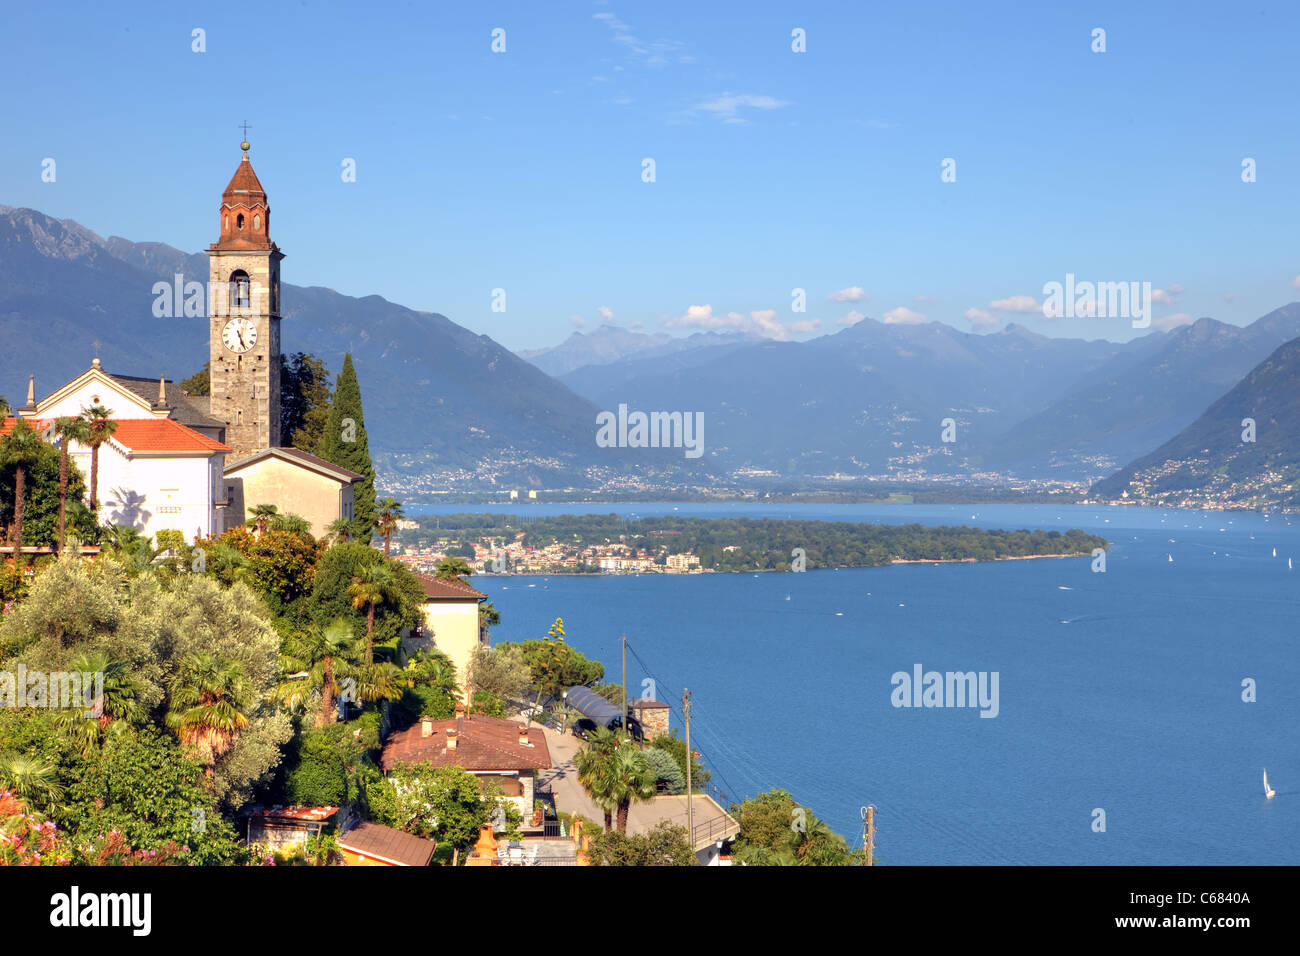 View of the Church of Ronco sopra Ascona to Ascona and Locarno and the mountains of Graubünden Stock Photo